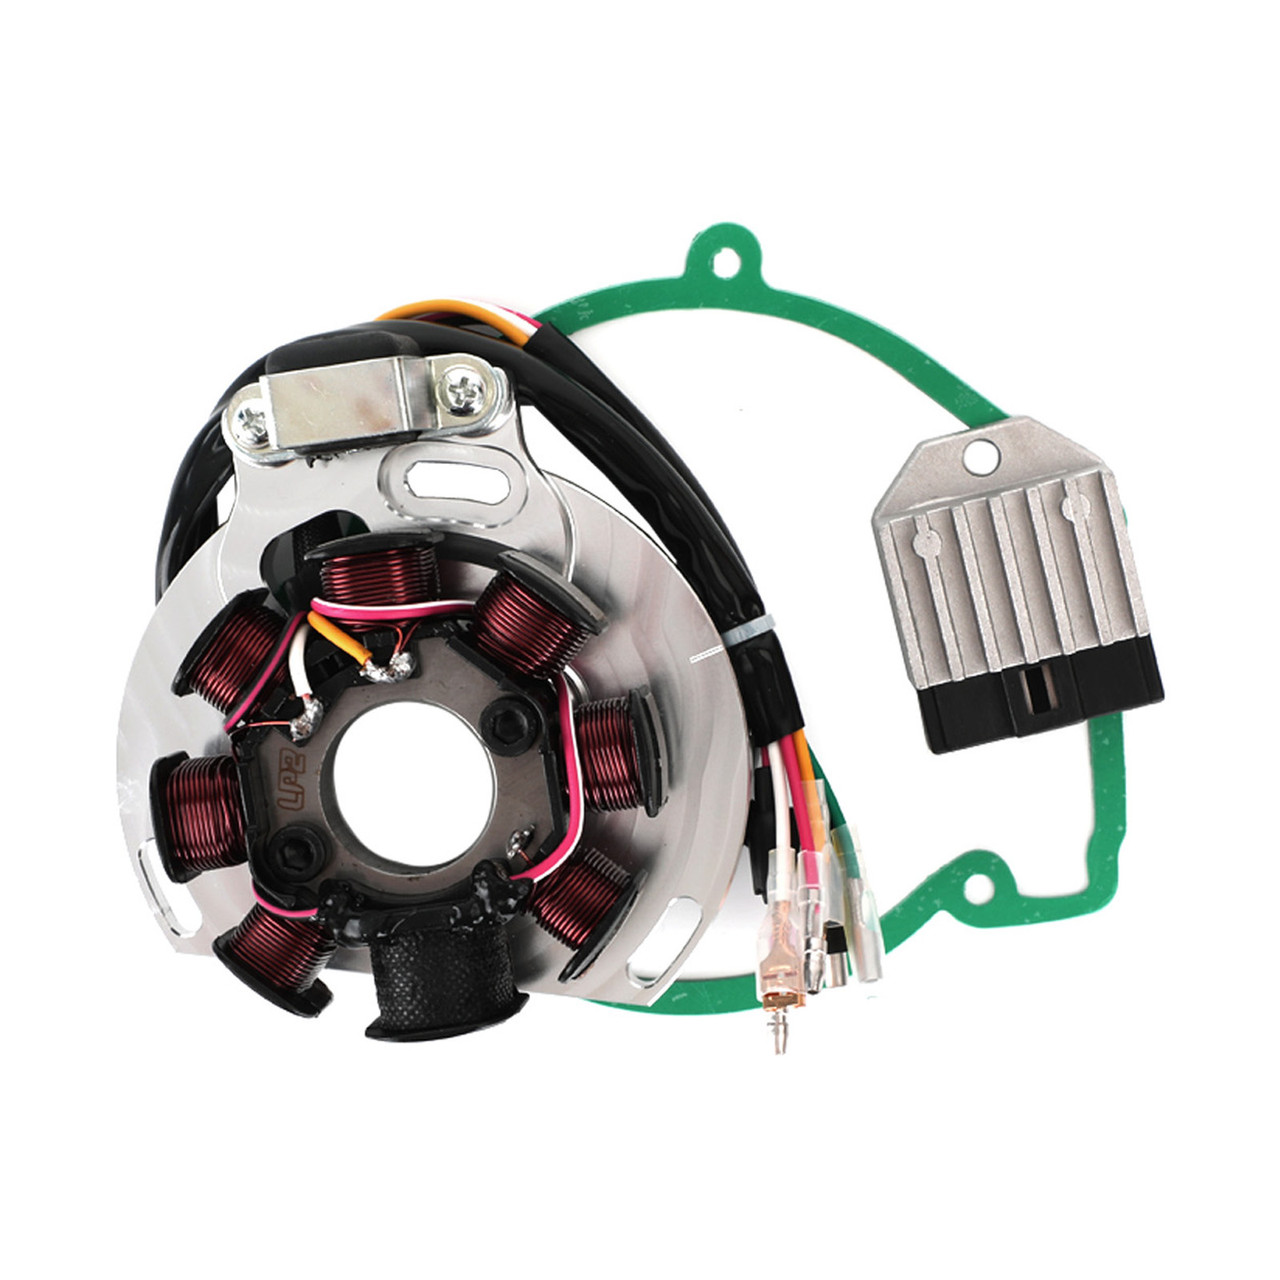 Magneto Coil Stator + Voltage Regulator + Gasket Assy Fit for 250 SX EXE EXC Six Days 300 MXC 380 SX 00-03